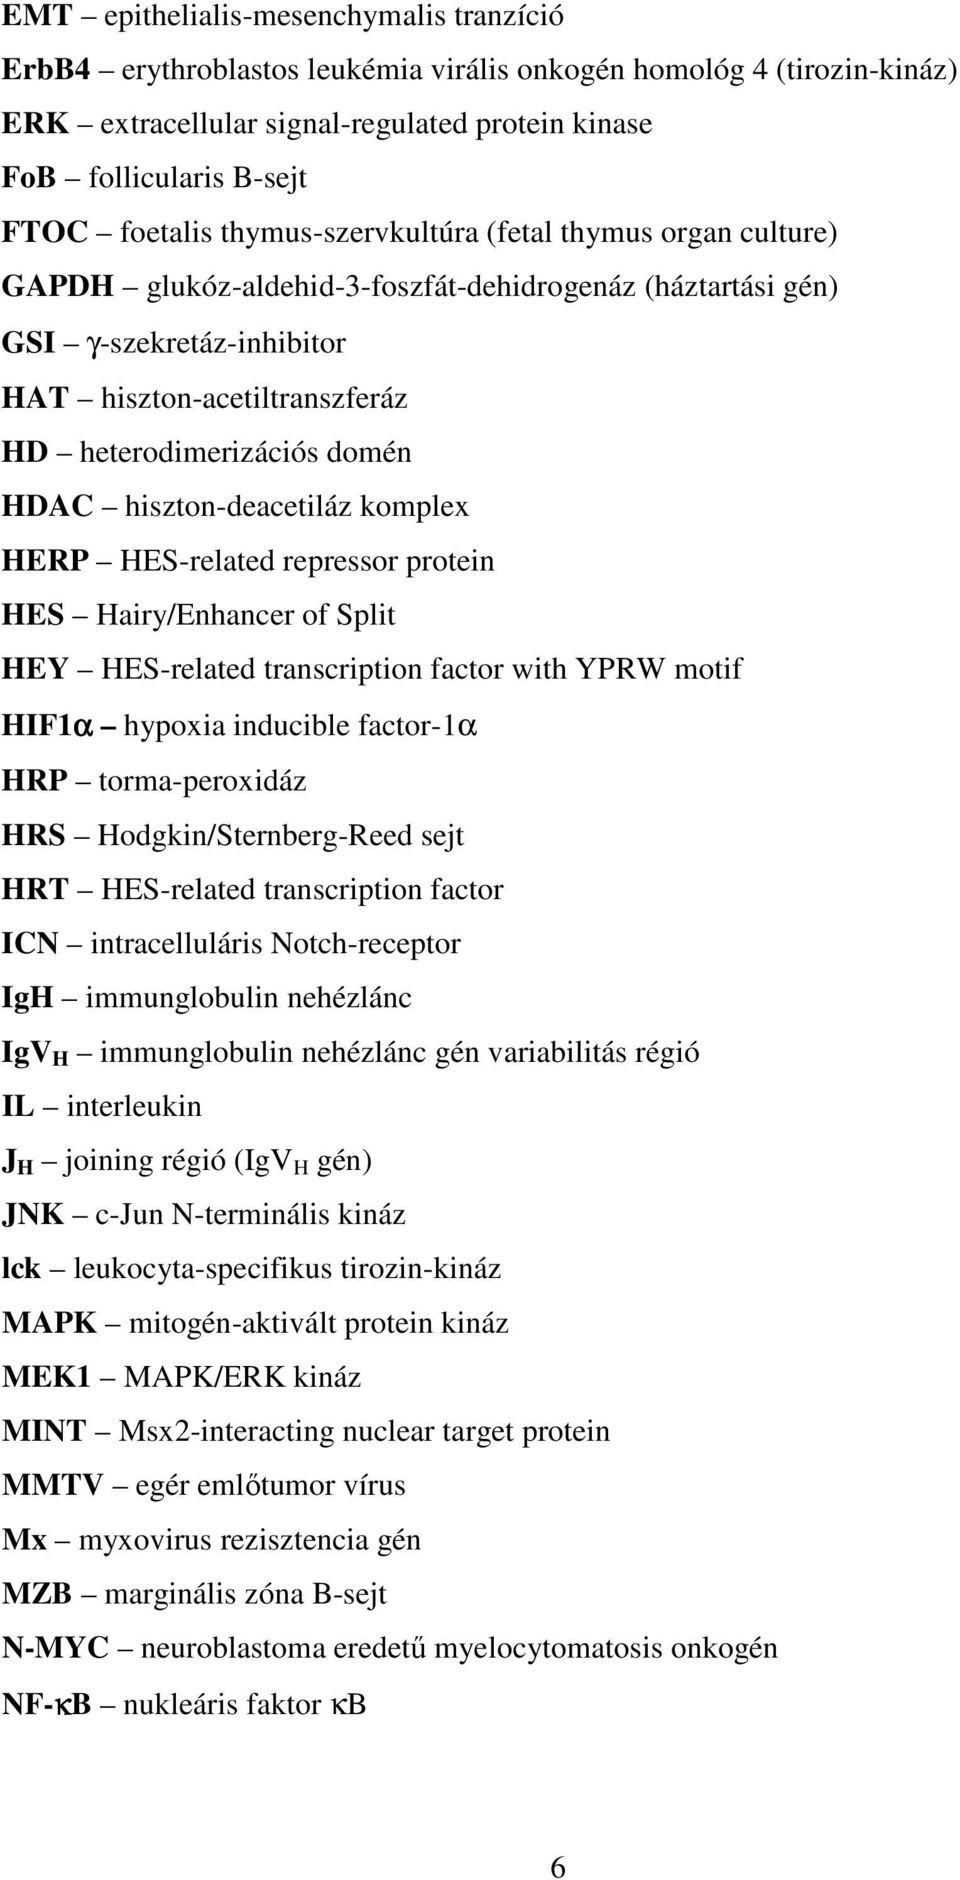 domén HDAC hiszton-deacetiláz komplex HERP HES-related repressor protein HES Hairy/Enhancer of Split HEY HES-related transcription factor with YPRW motif HIF1α hypoxia inducible factor-1α HRP